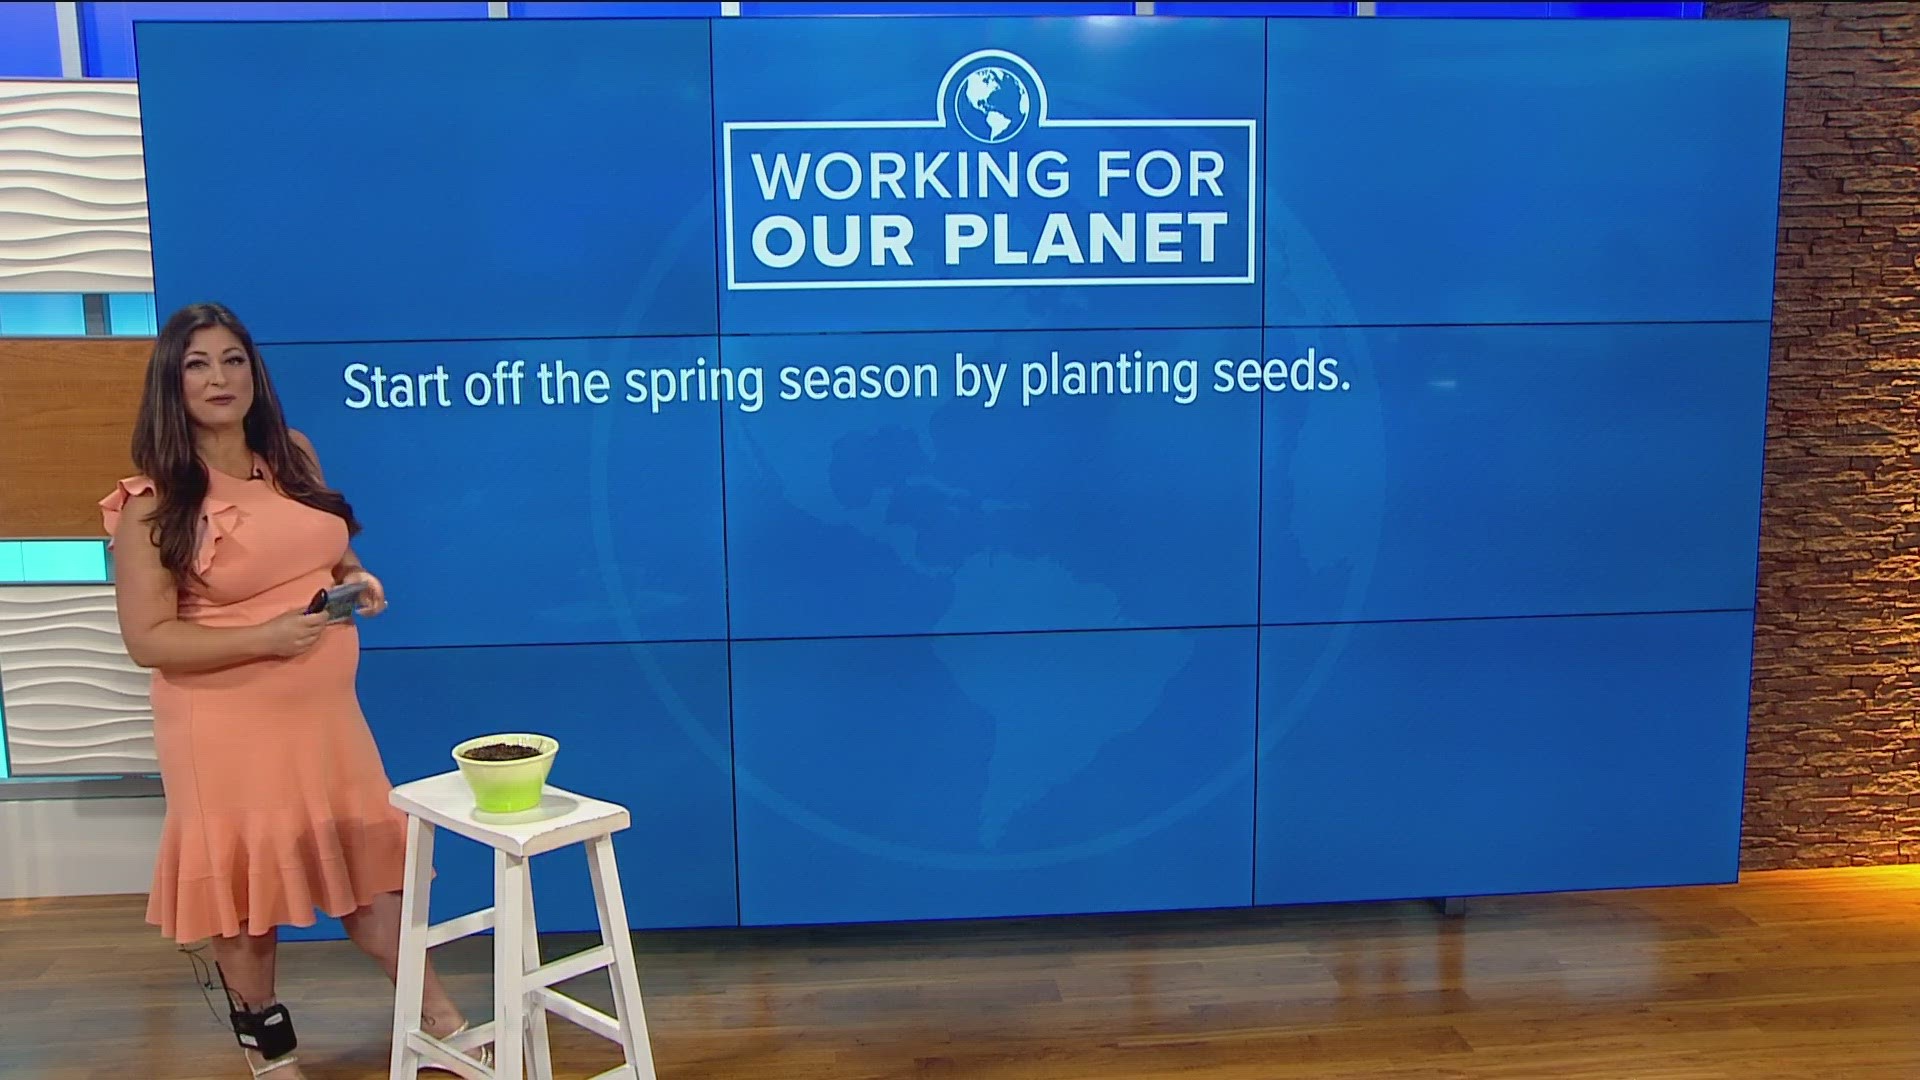 You can get seeds for just over a dollar and then plant them and take advantage of all the rain that is set to hit San Diego in the coming days and weeks.